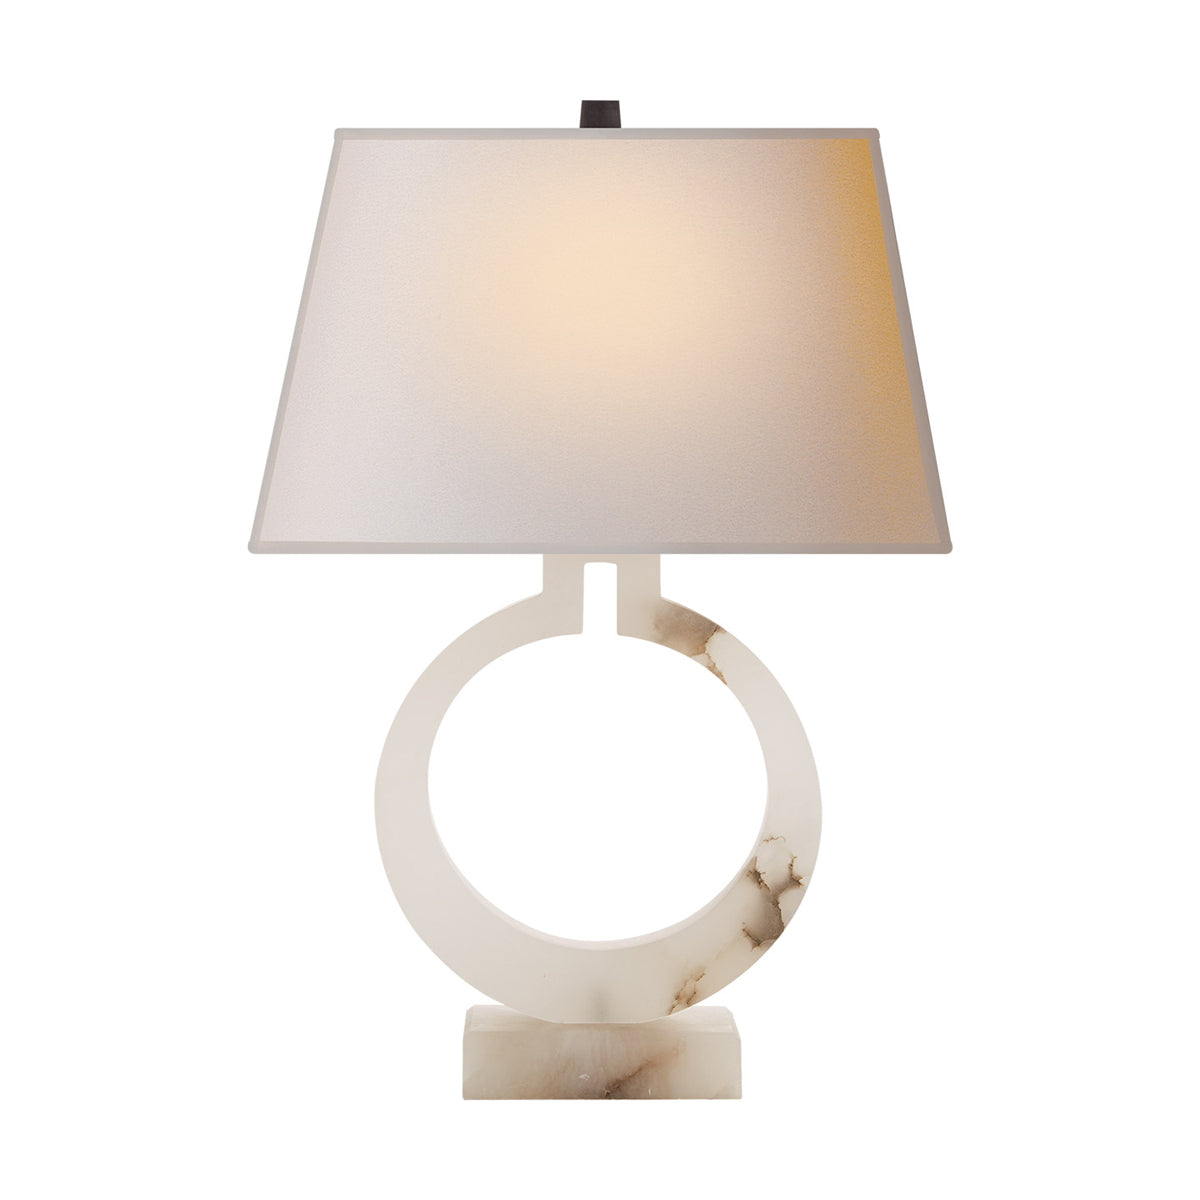 RING FORM LARGE TABLE LAMP